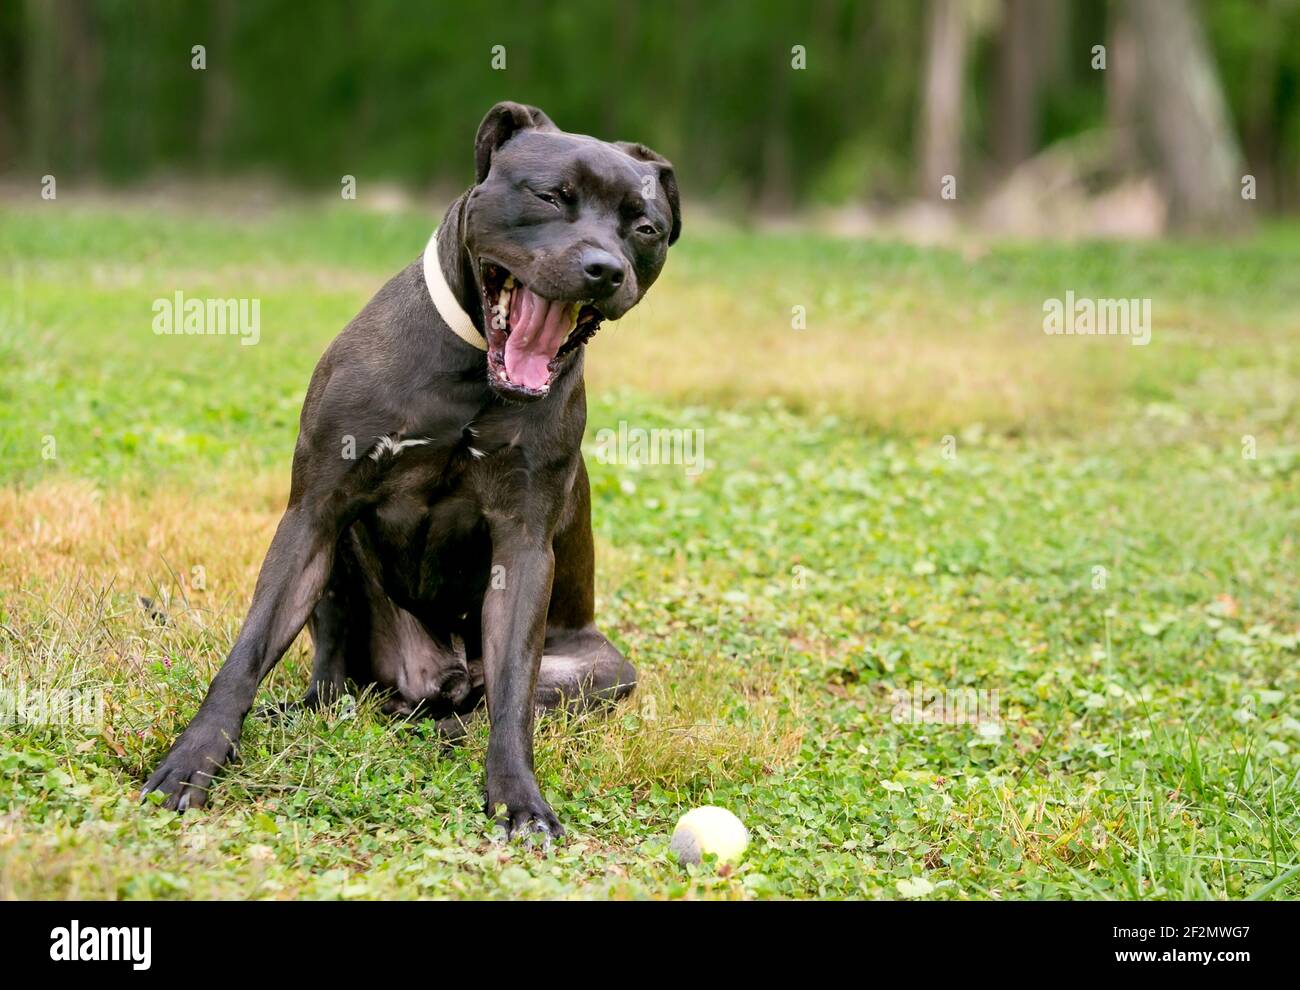 A black Pit Bull Terrier mixed breed dog sitting outdoors and yawning Stock Photo